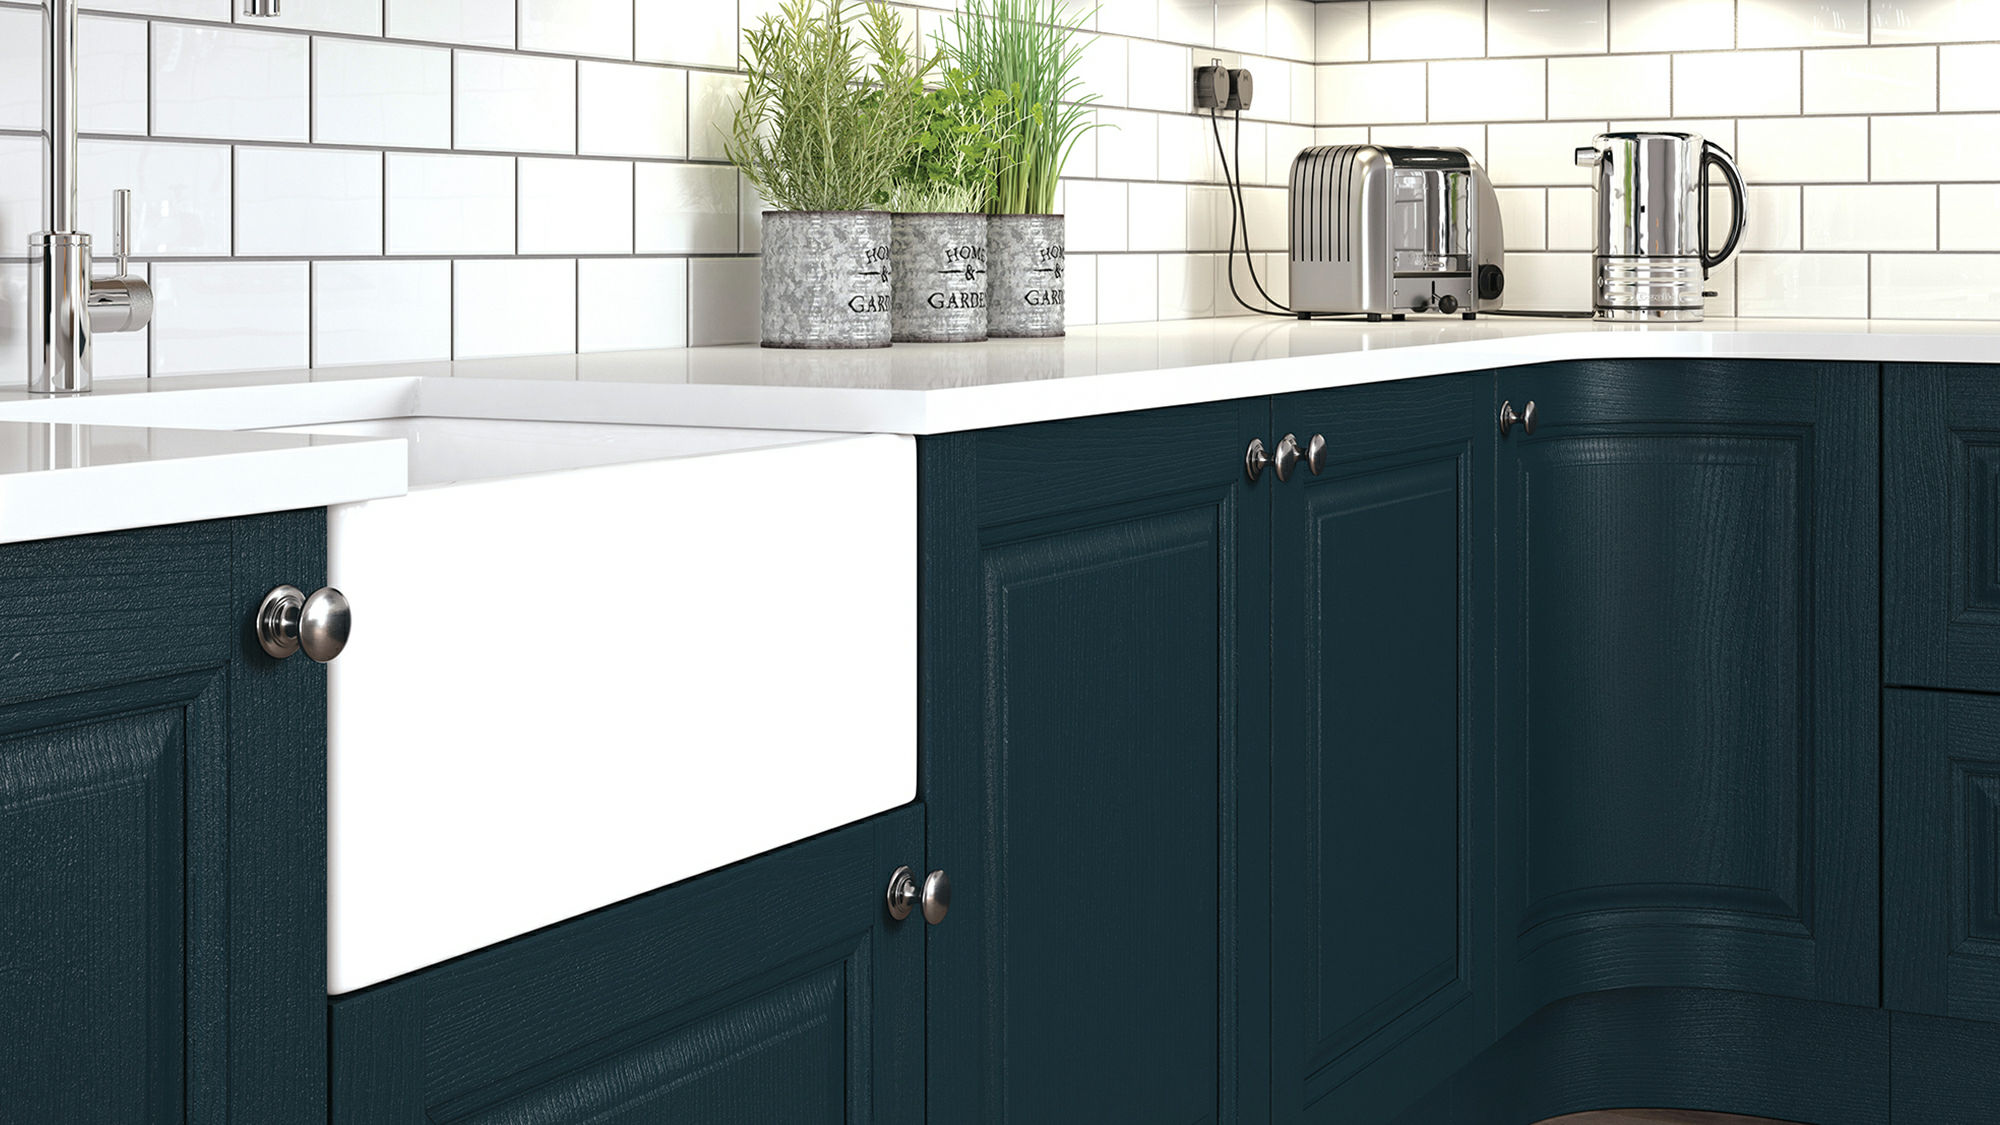 Jefferson Solid Wood Marine kitchens offering a blend of sturdiness and classic beauty in marine blue